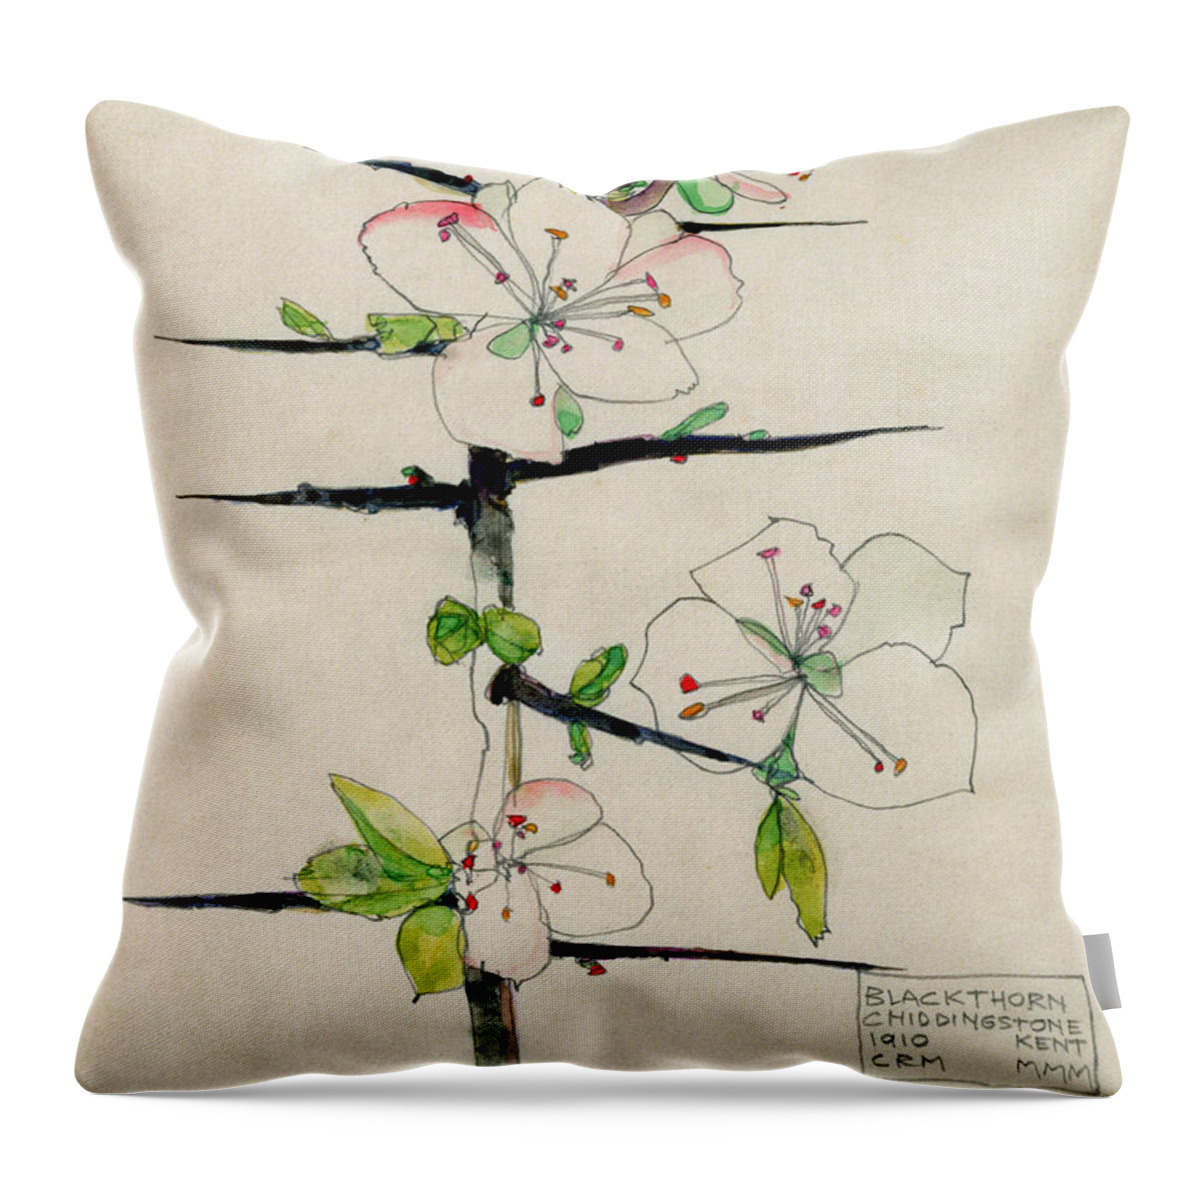 Charles Rennie Mackintosh Throw Pillow featuring the painting Blackthorn, Chiddingstone, Kent, 1910 by Charles Rennie Mackintosh